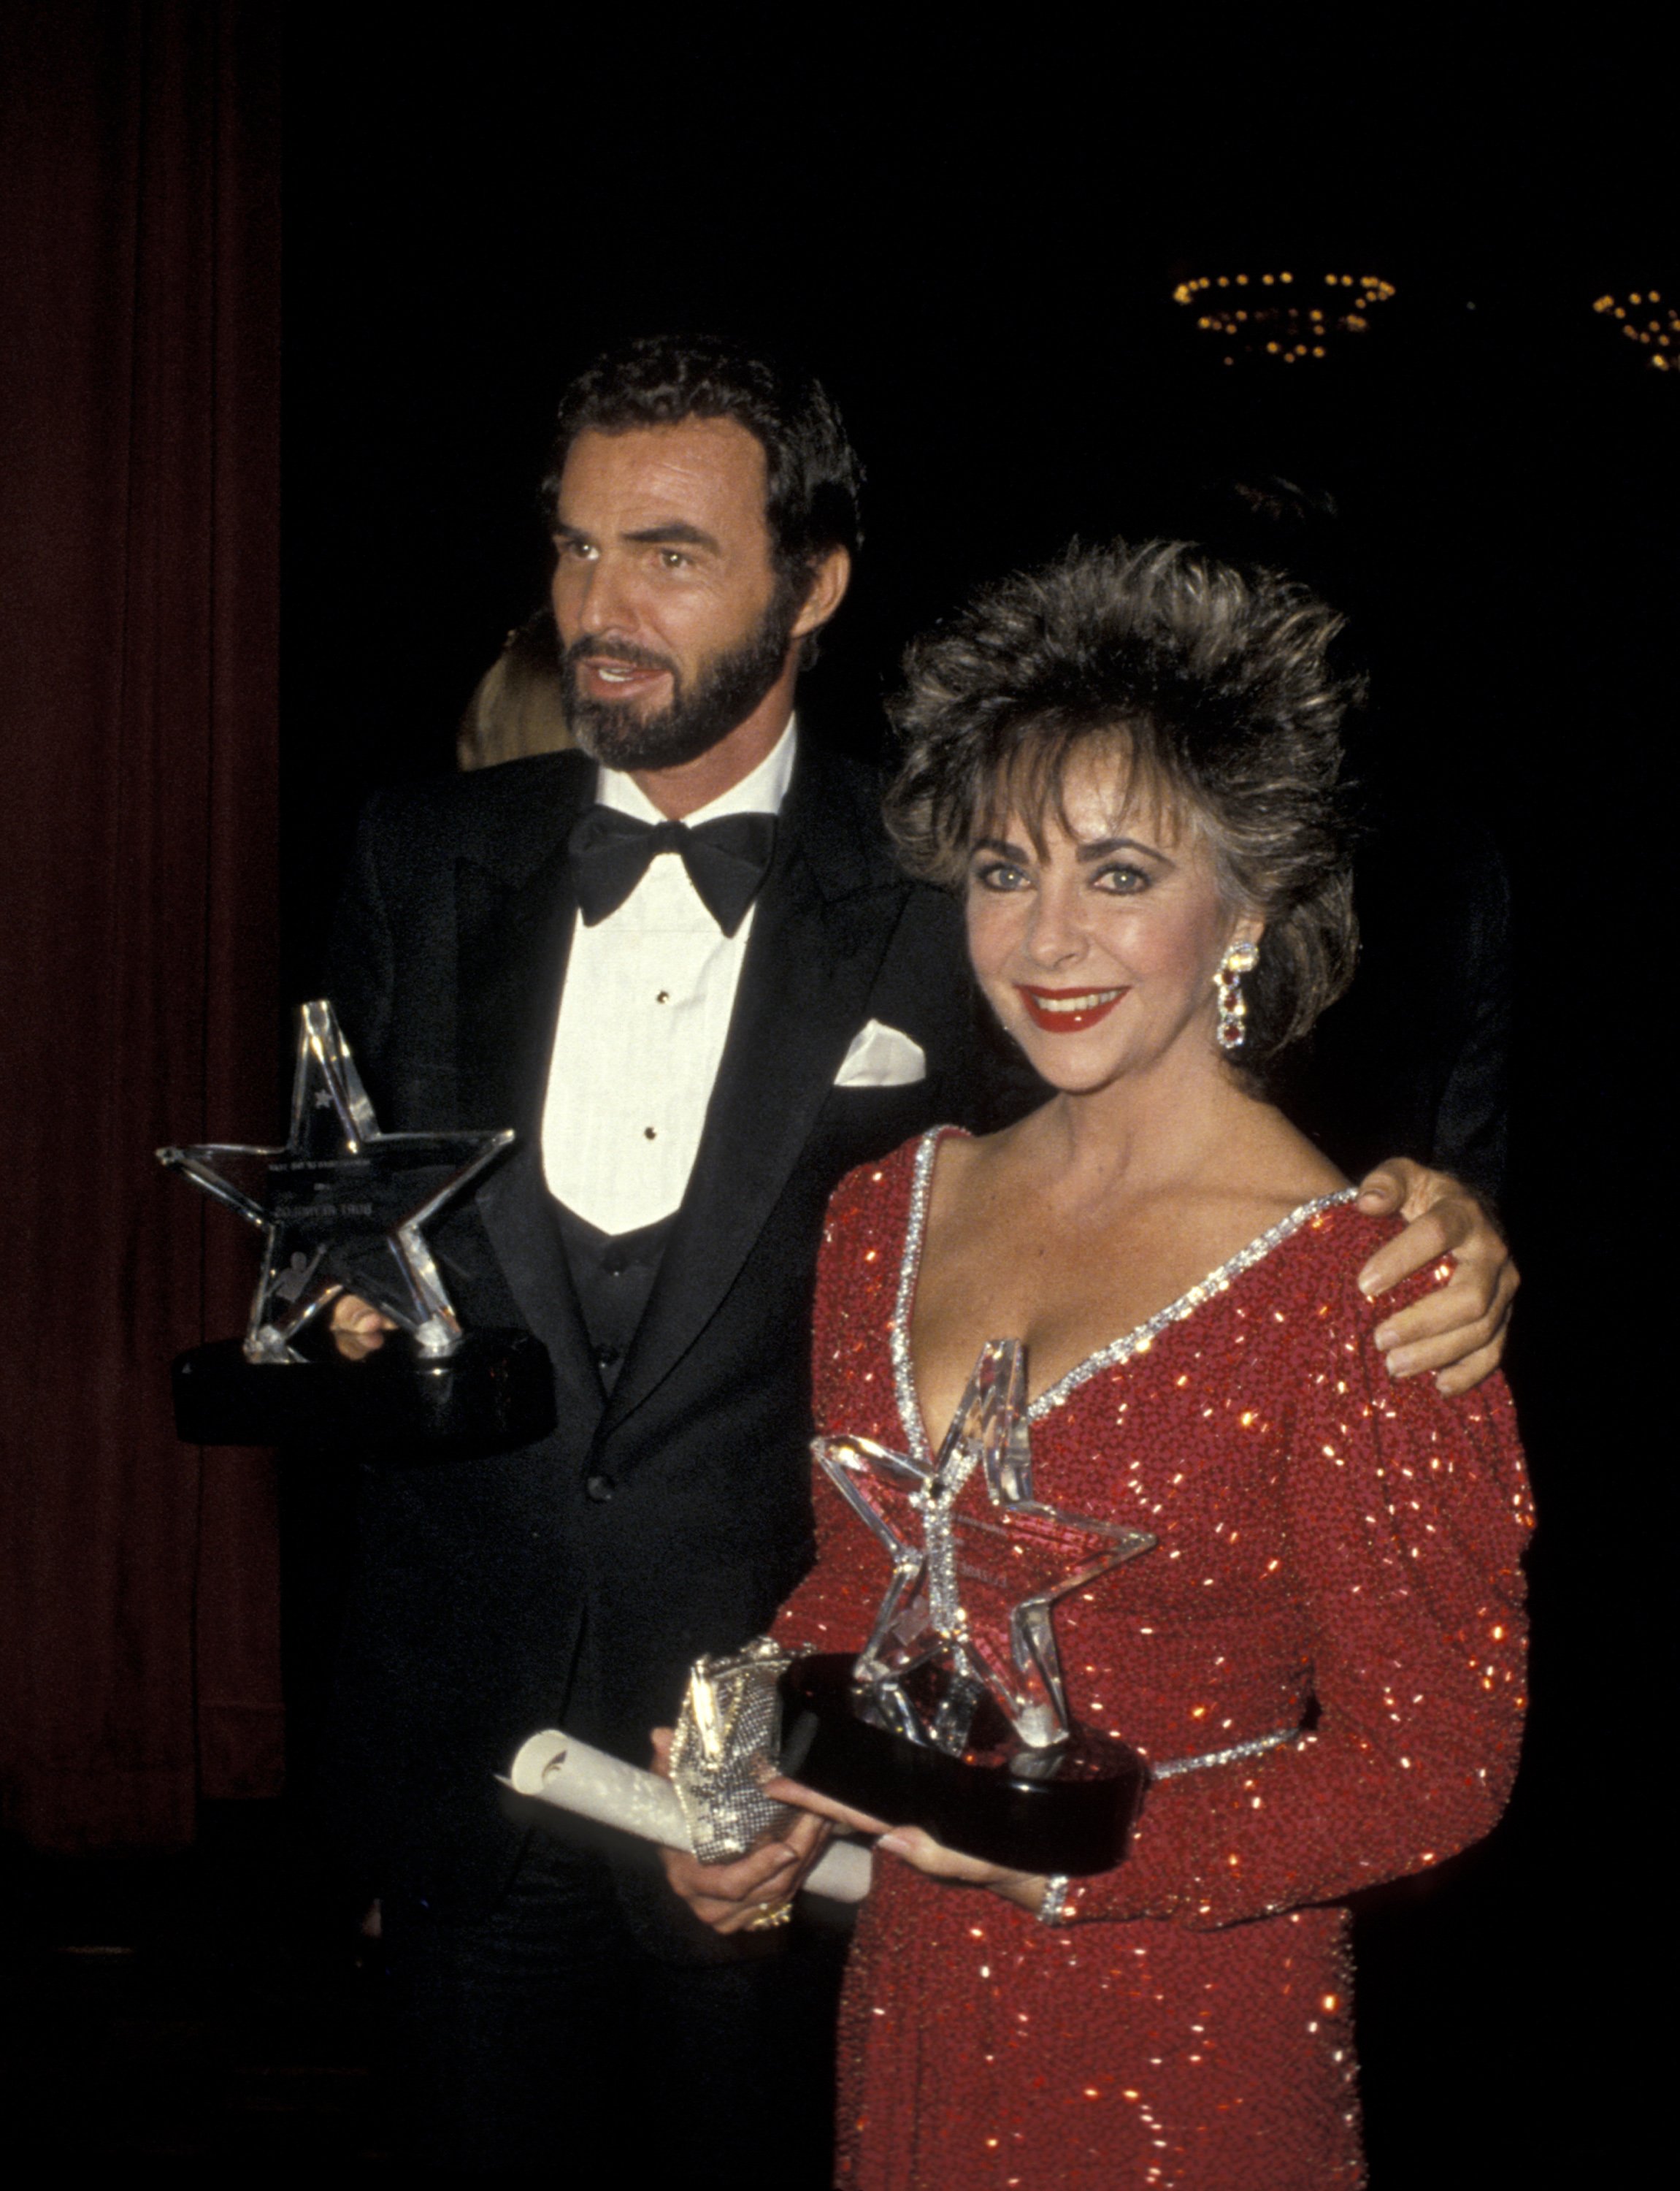 Burt Reynolds and Elizabeth Taylor during Second Annual Starlight Foundation Benefit Gala at The Plaza Hotel in New York City, New York, United States. | Source: Getty Images